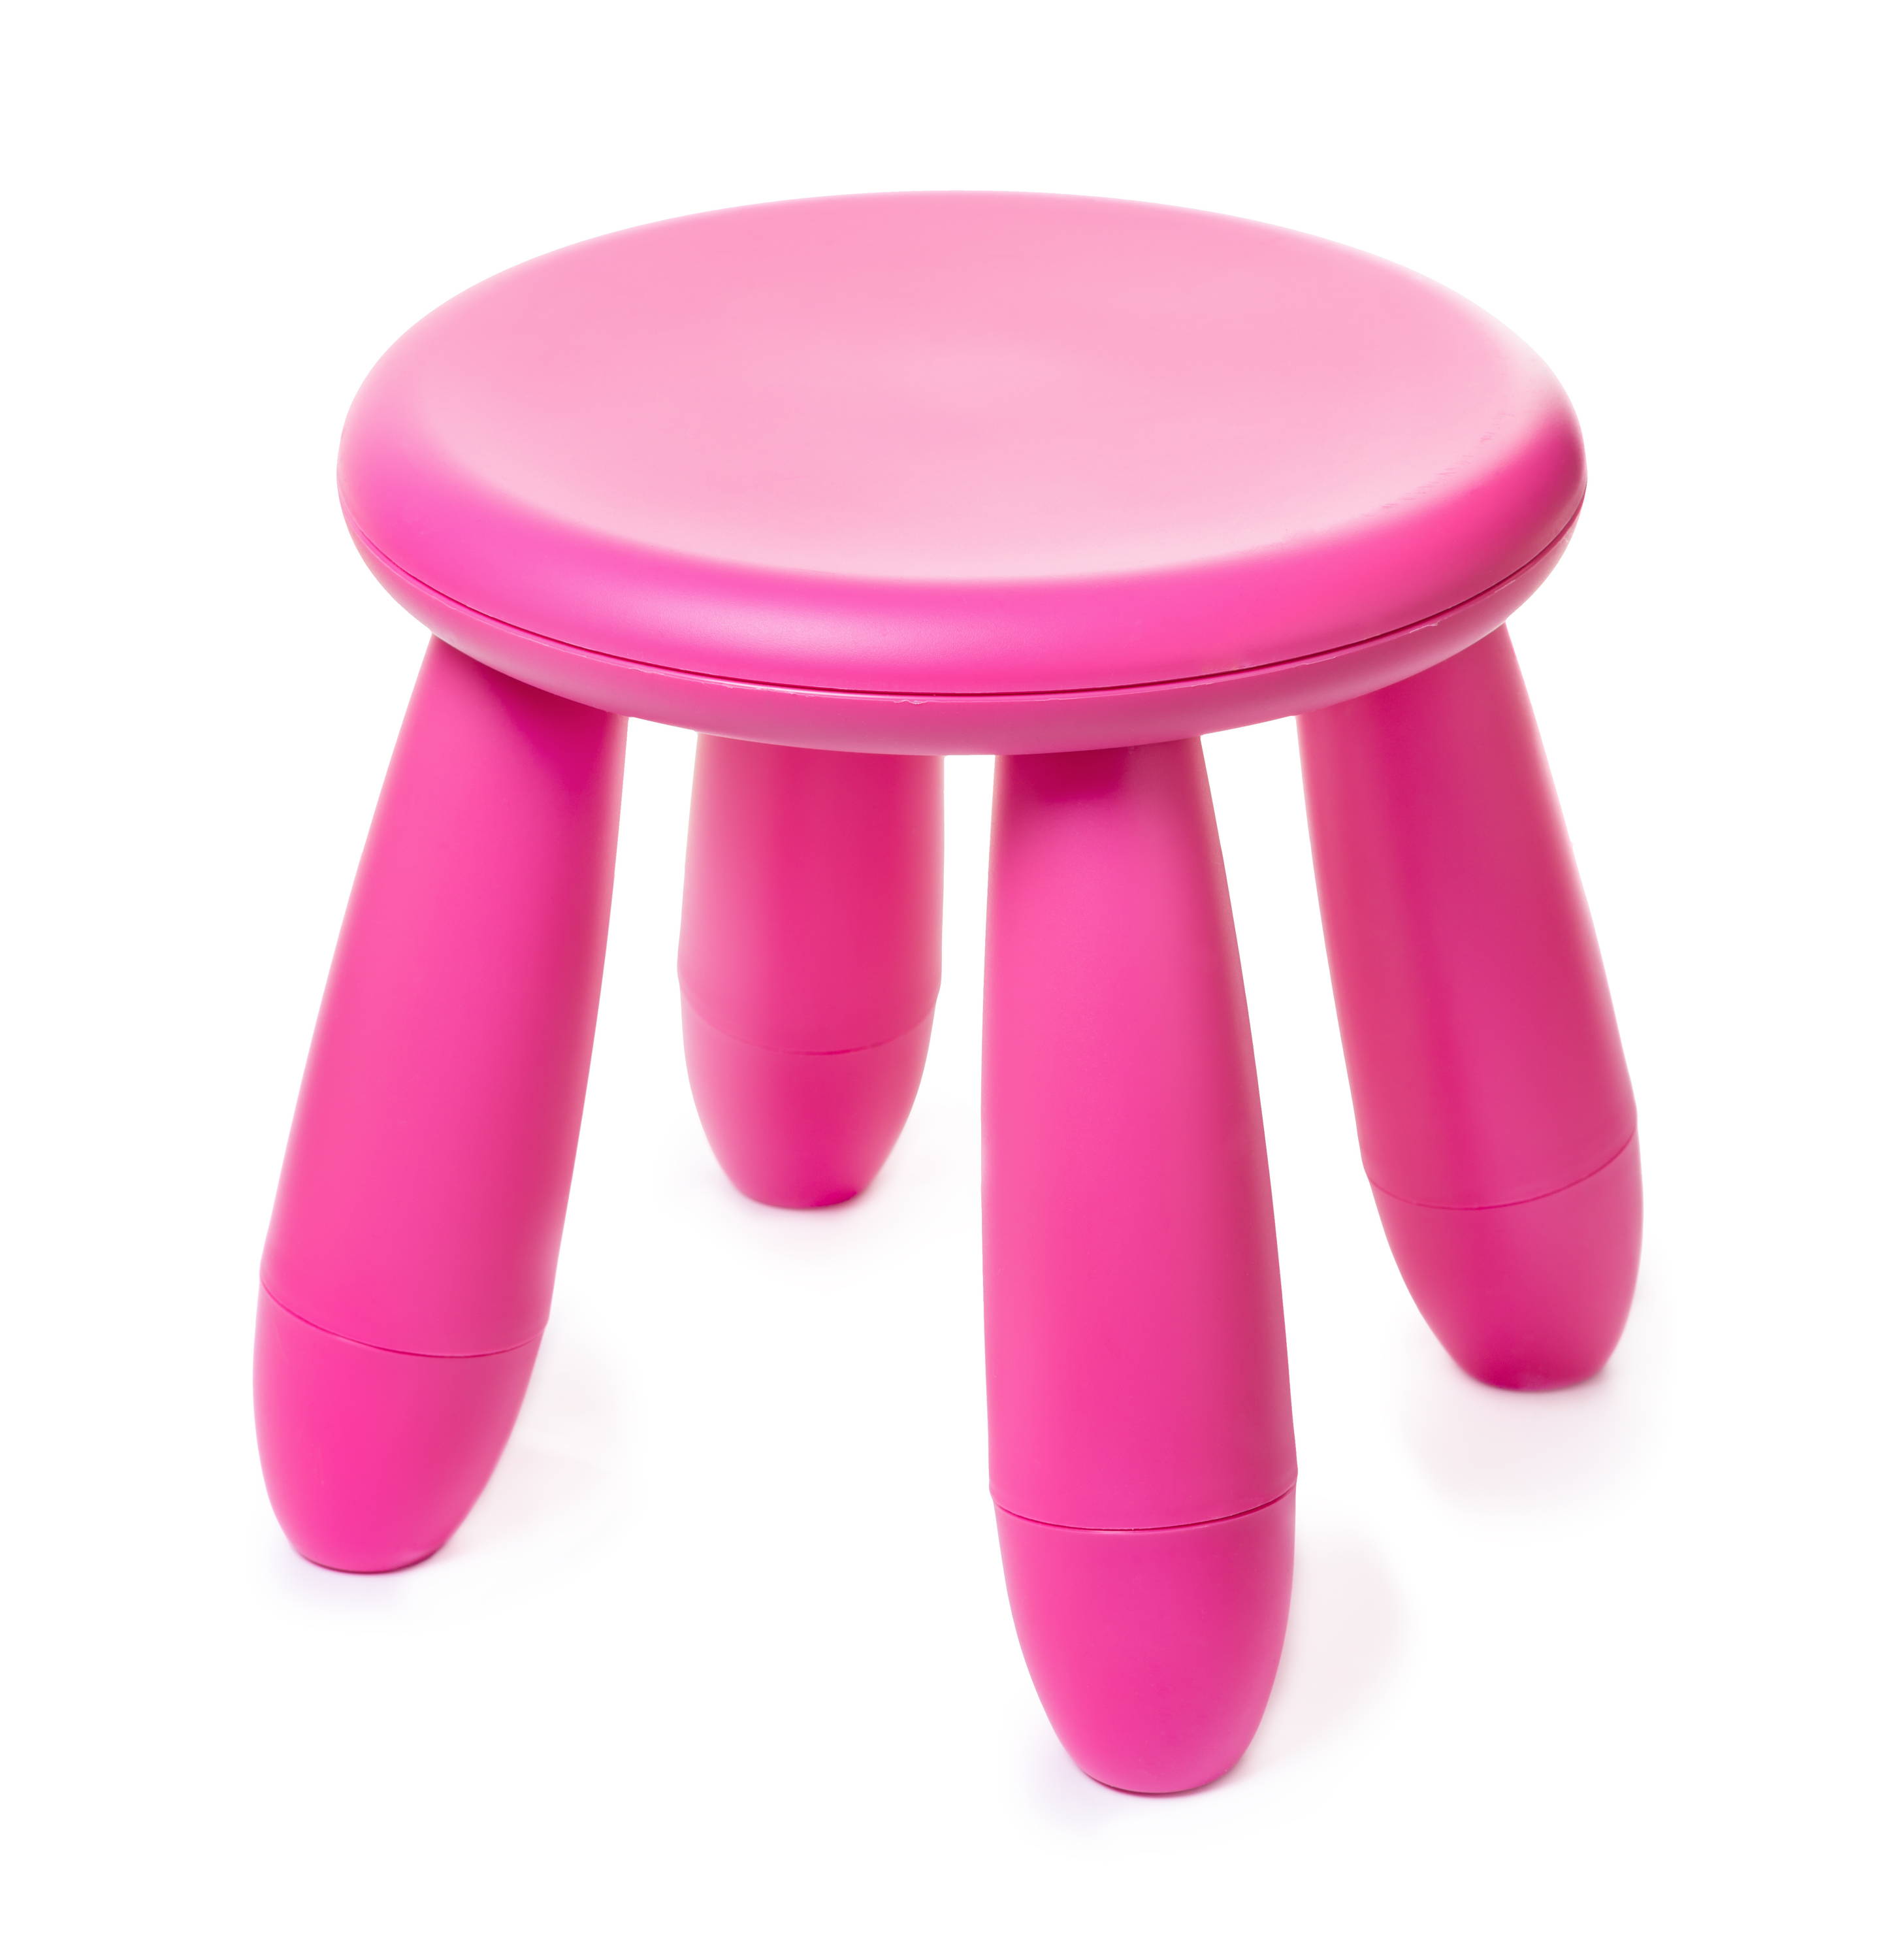 Pink wiggle stool for kids